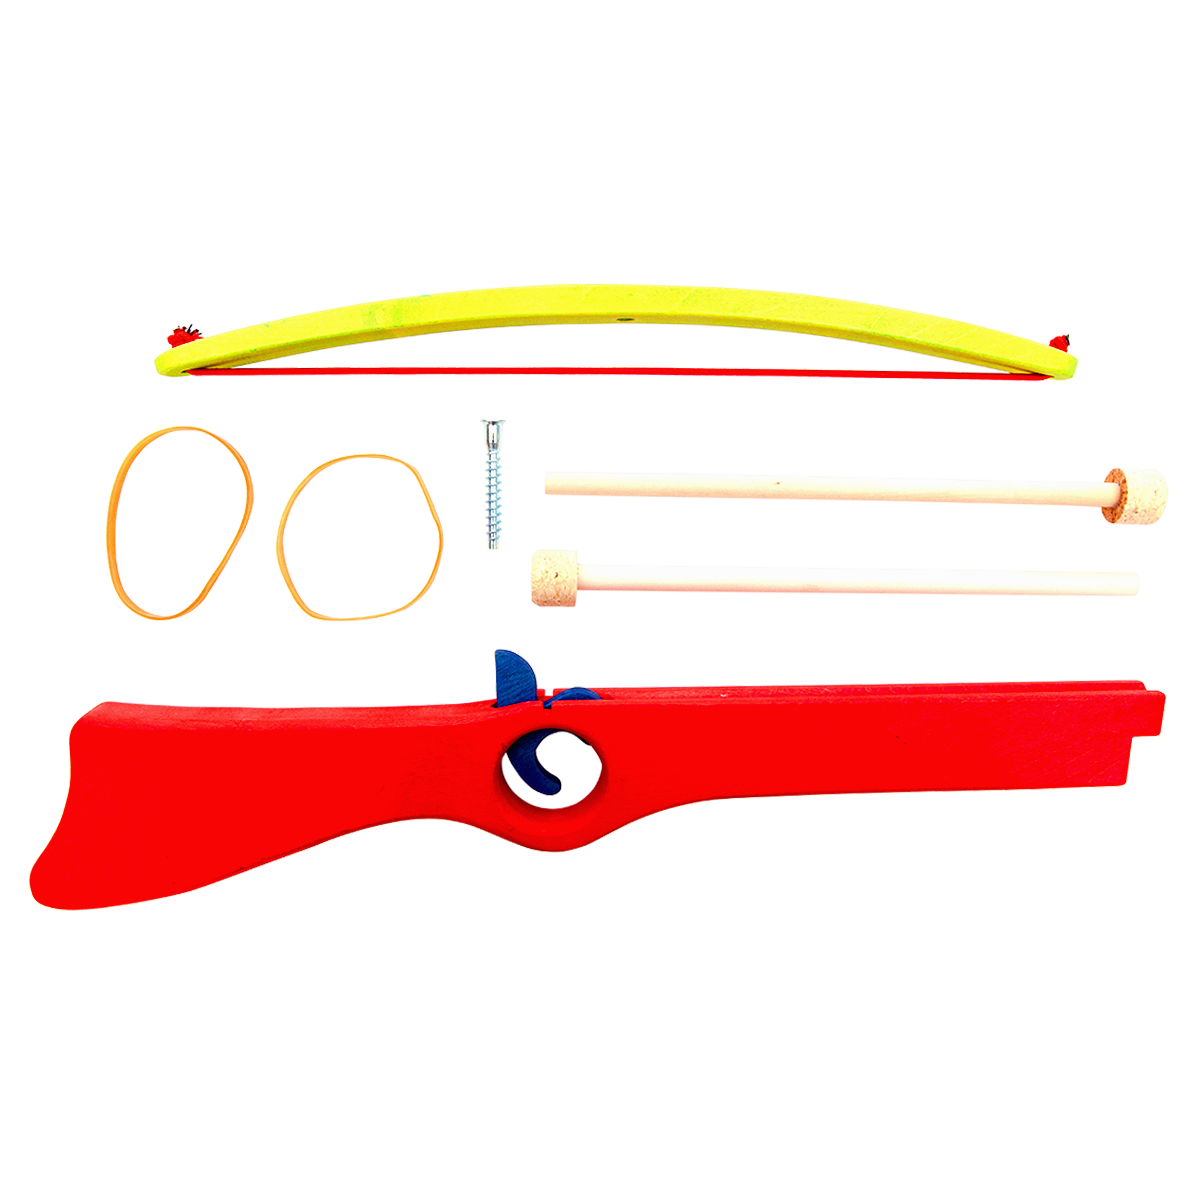 Different components and parts of our red wooden toy crossbow with cork arrows